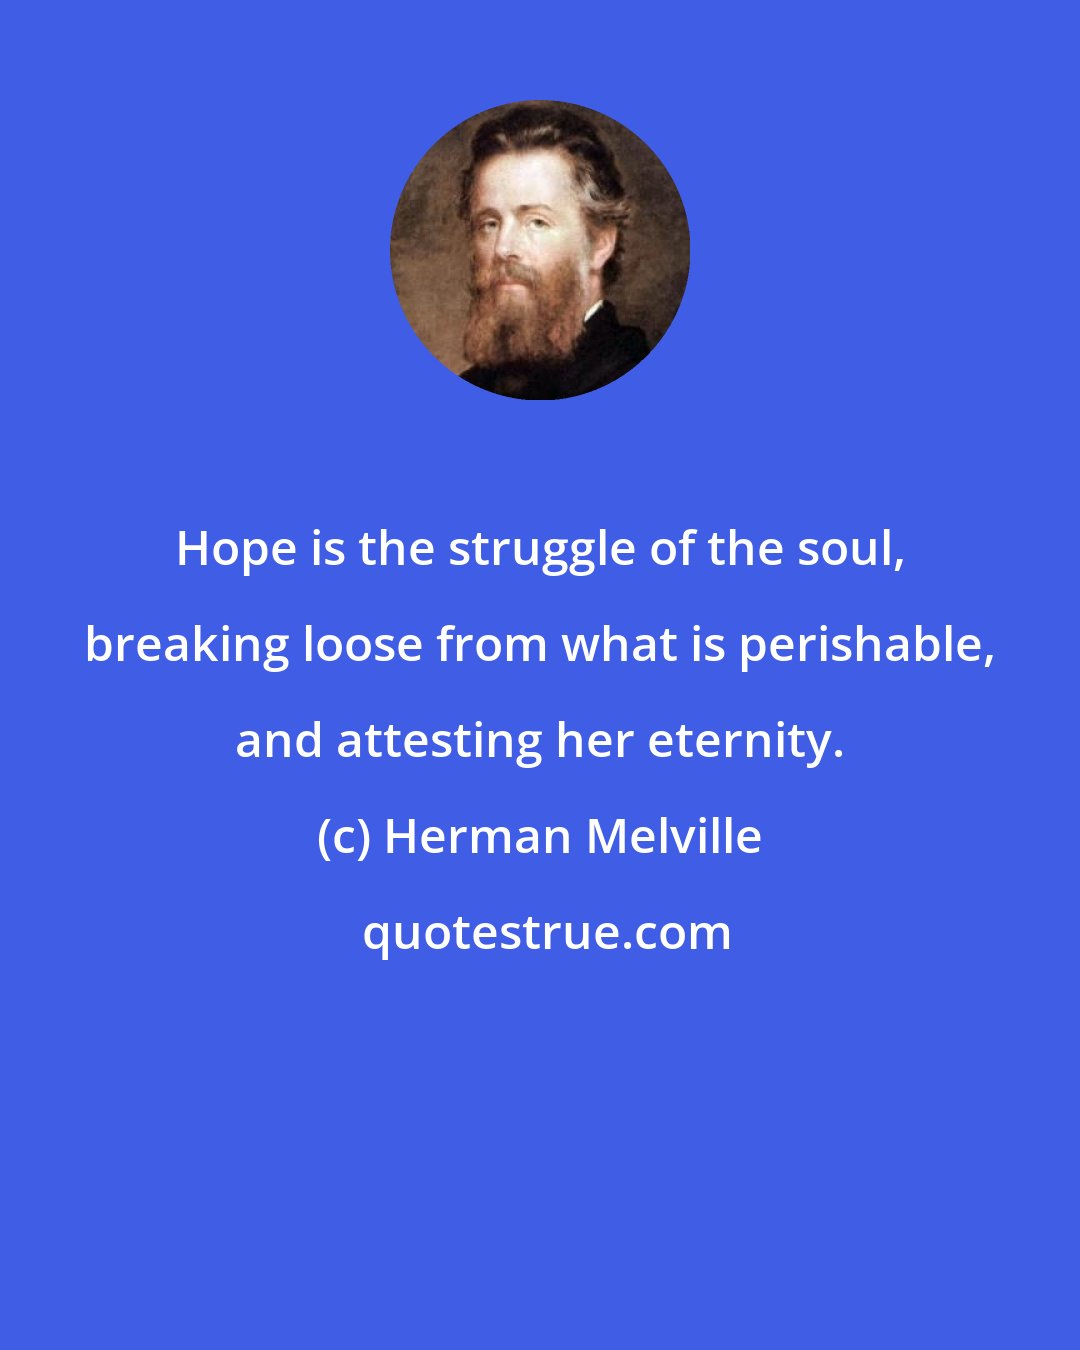 Herman Melville: Hope is the struggle of the soul, breaking loose from what is perishable, and attesting her eternity.